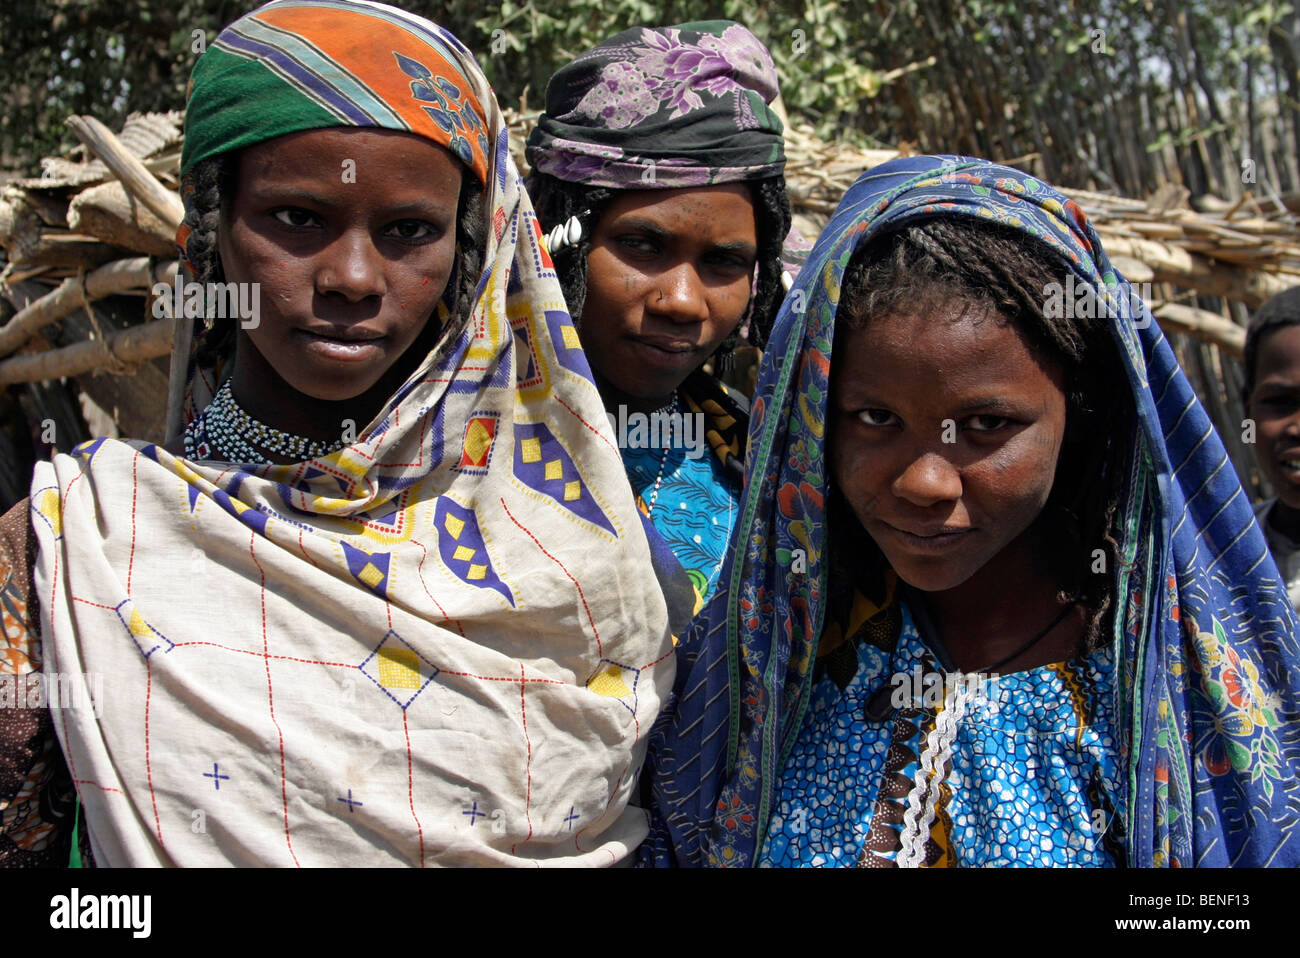 Close up of three young native black women in traditional dress wearing headscarfs in Chad, Central Africa Stock Photo